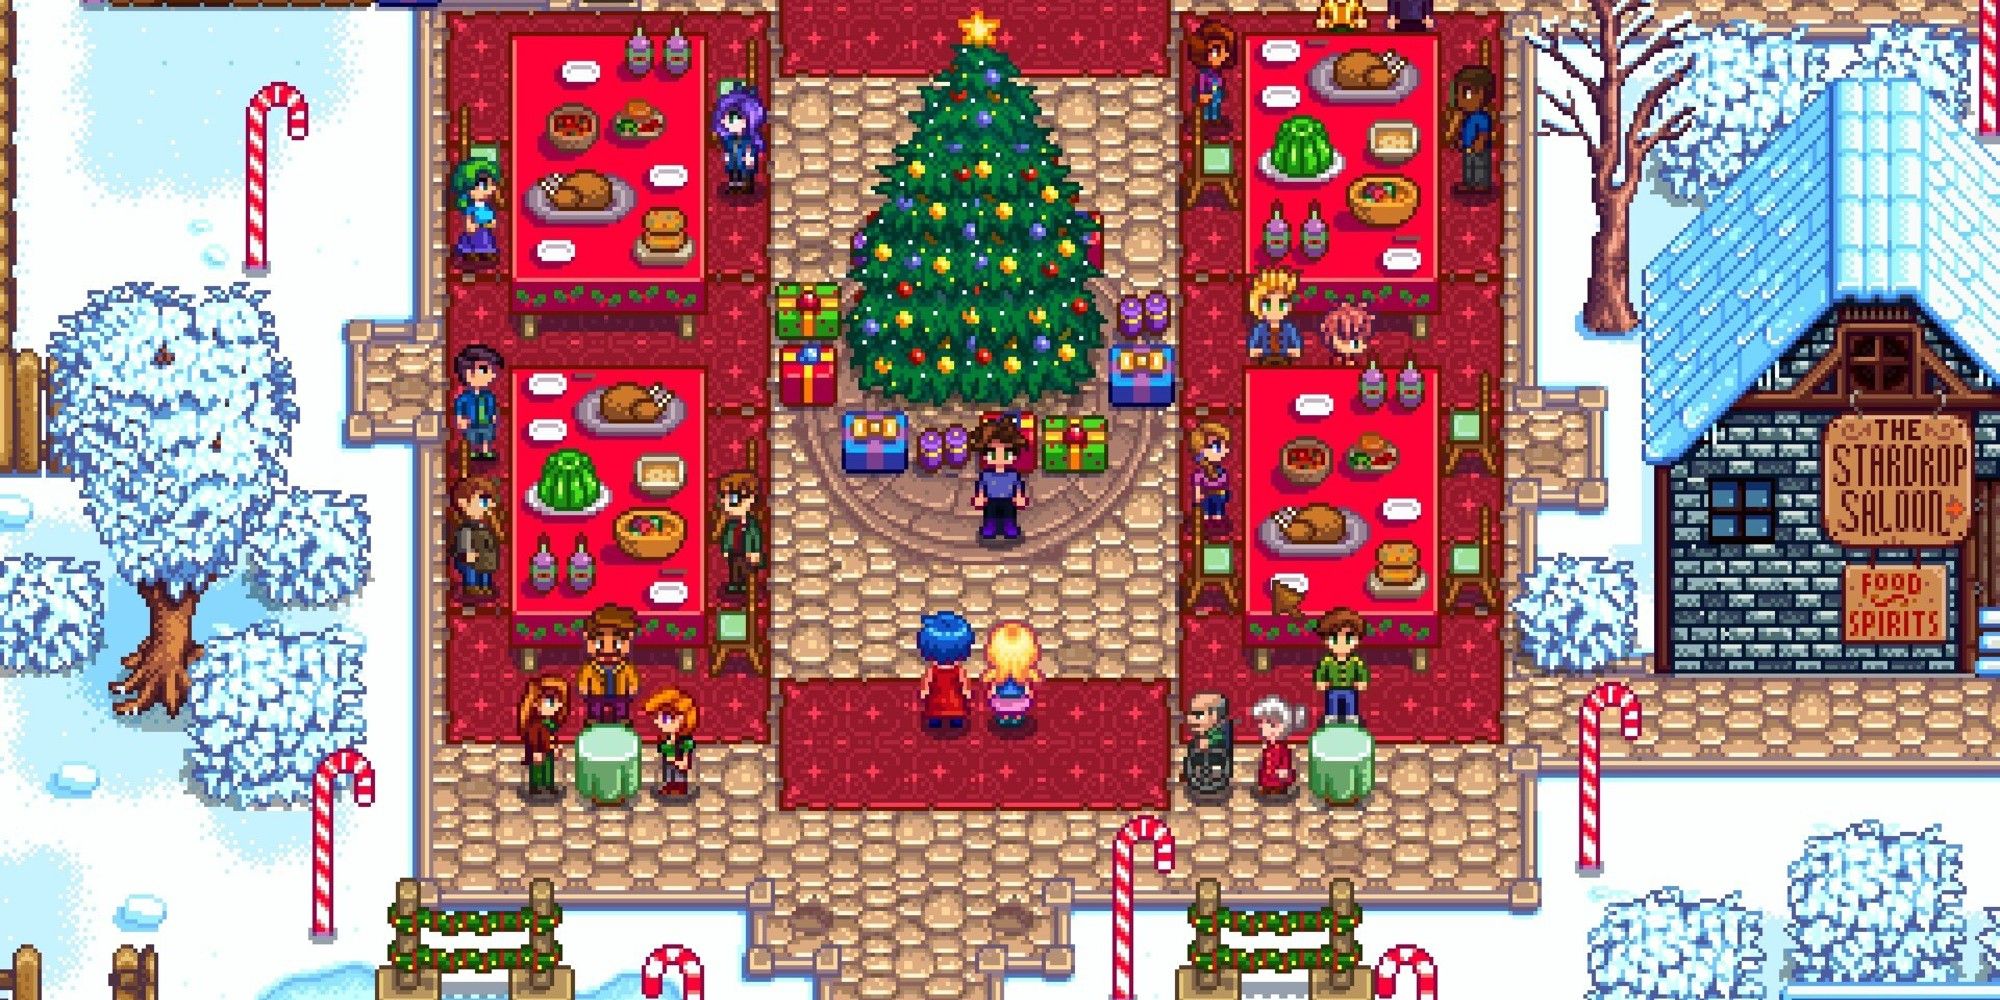 player standing near tree at the feast of the winter star